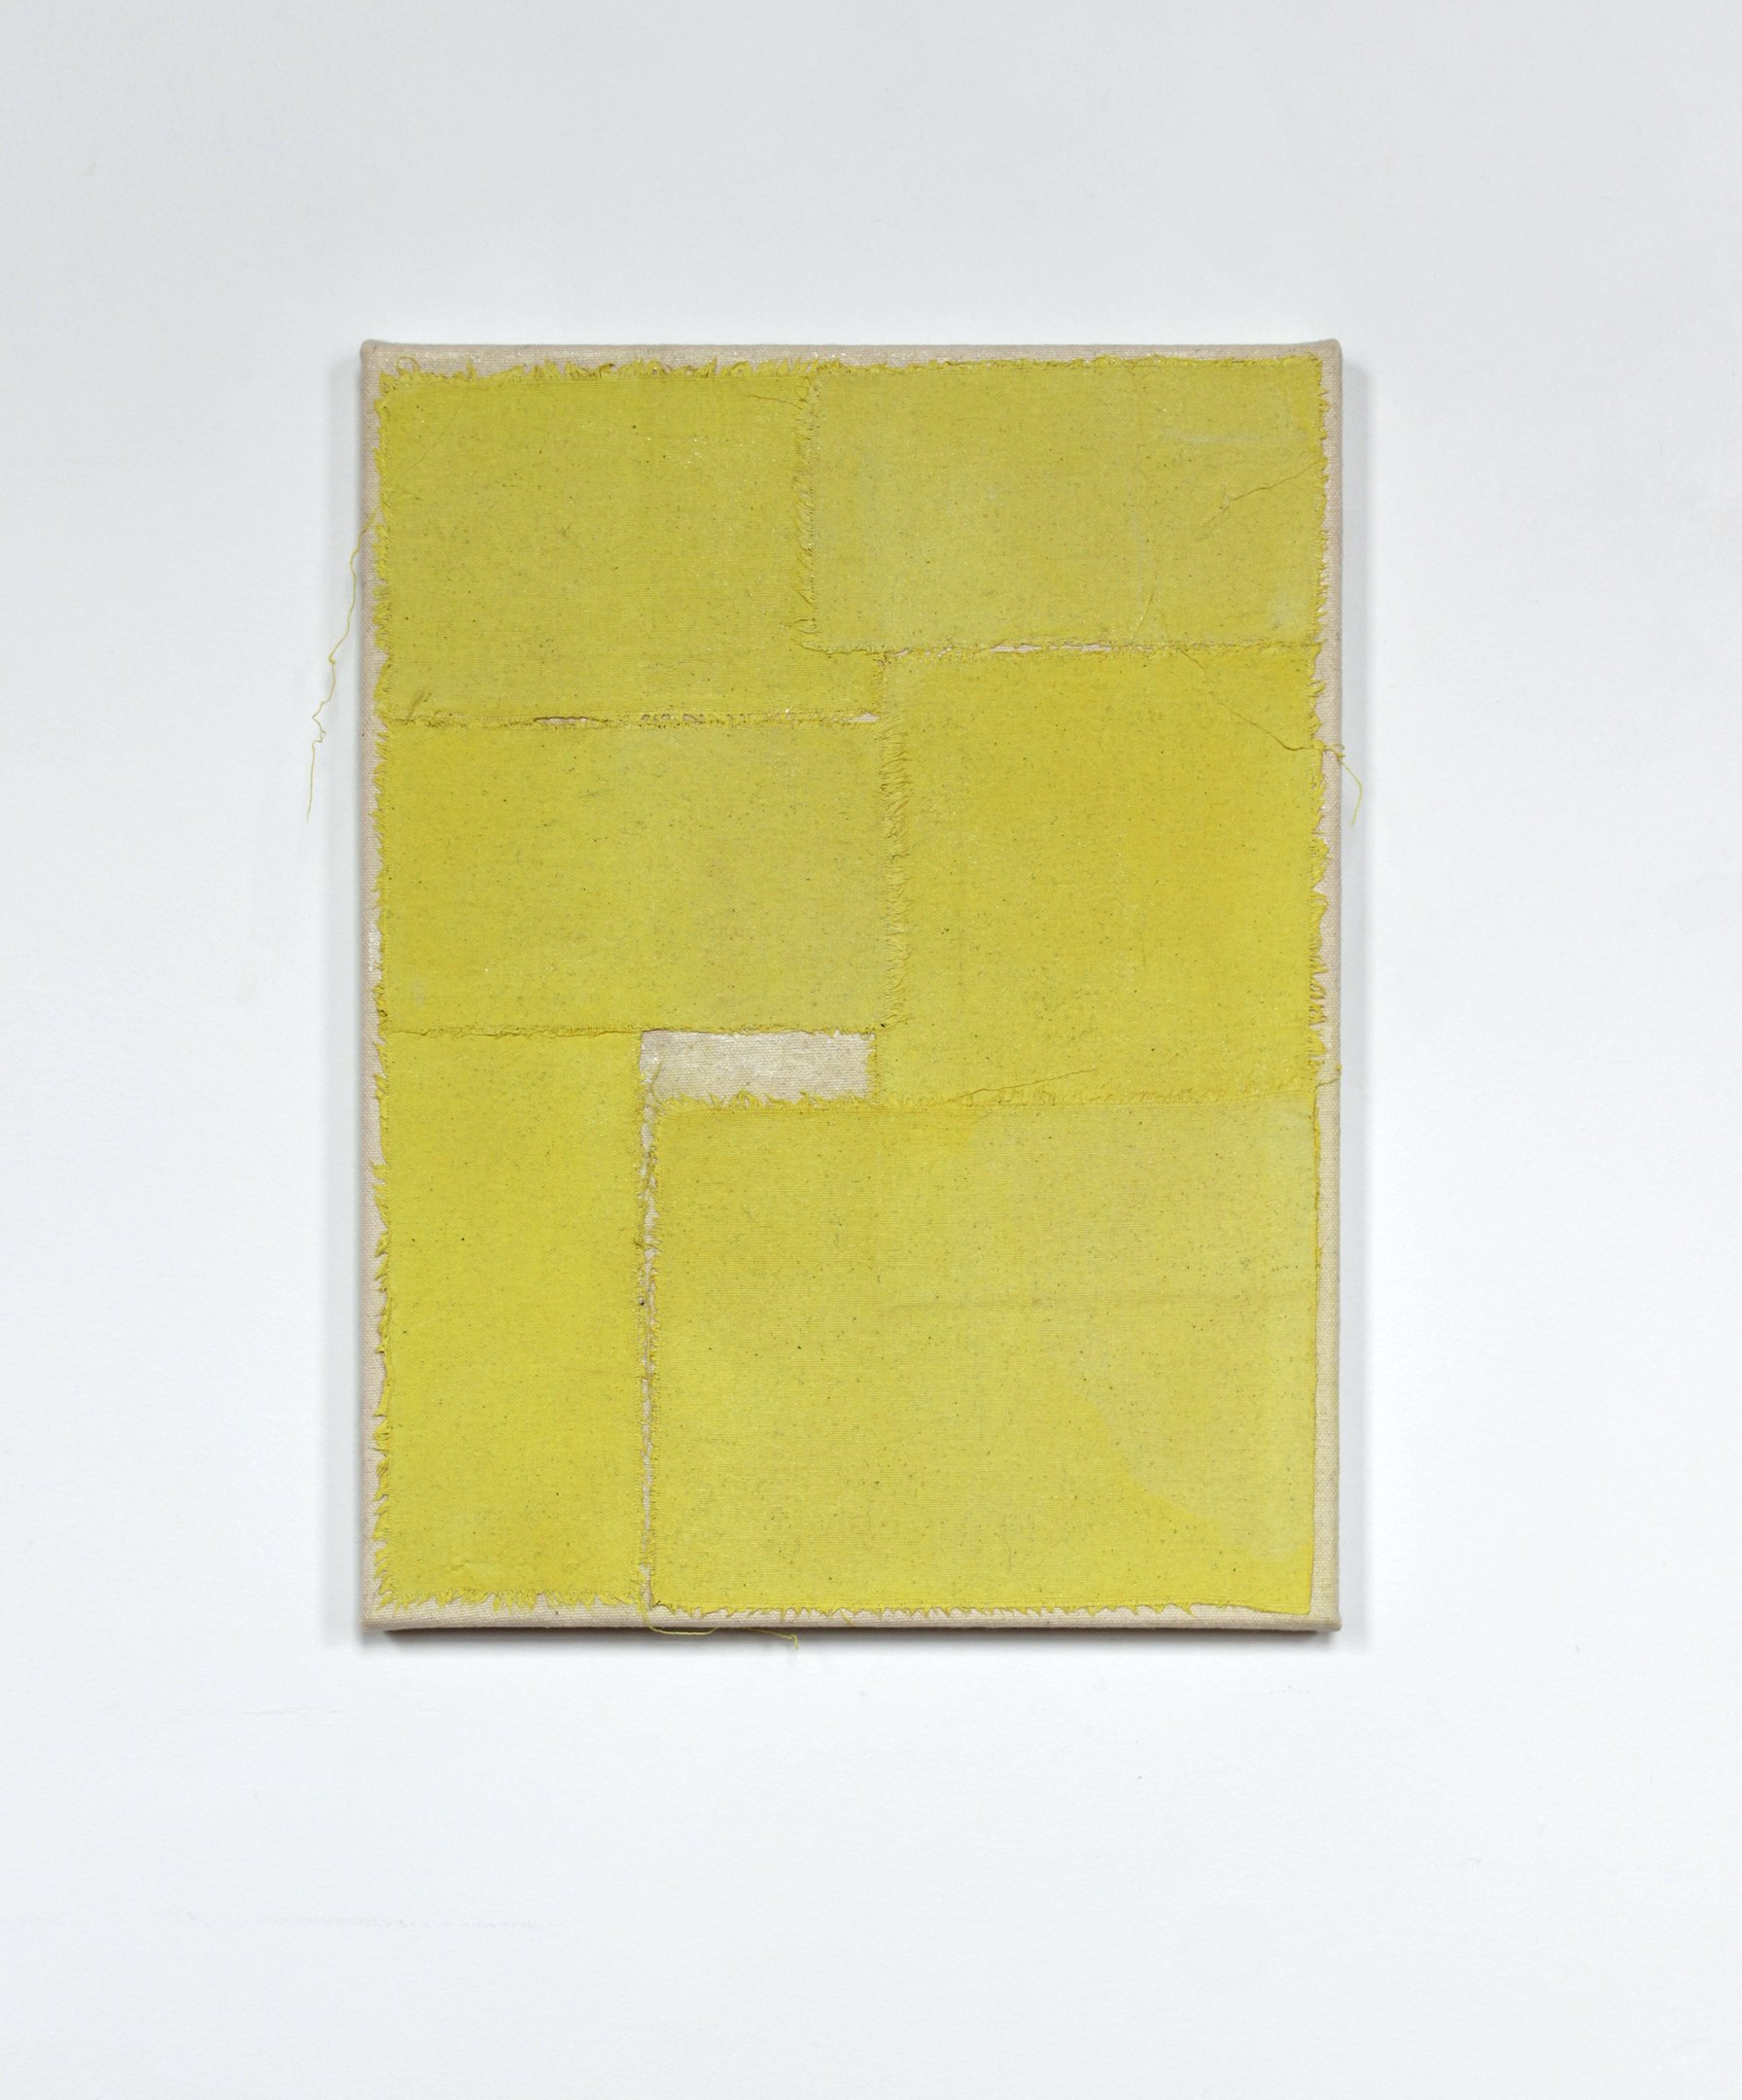 fringe painting (yellow), 2022, dyed cotton, r.s.g.JPG